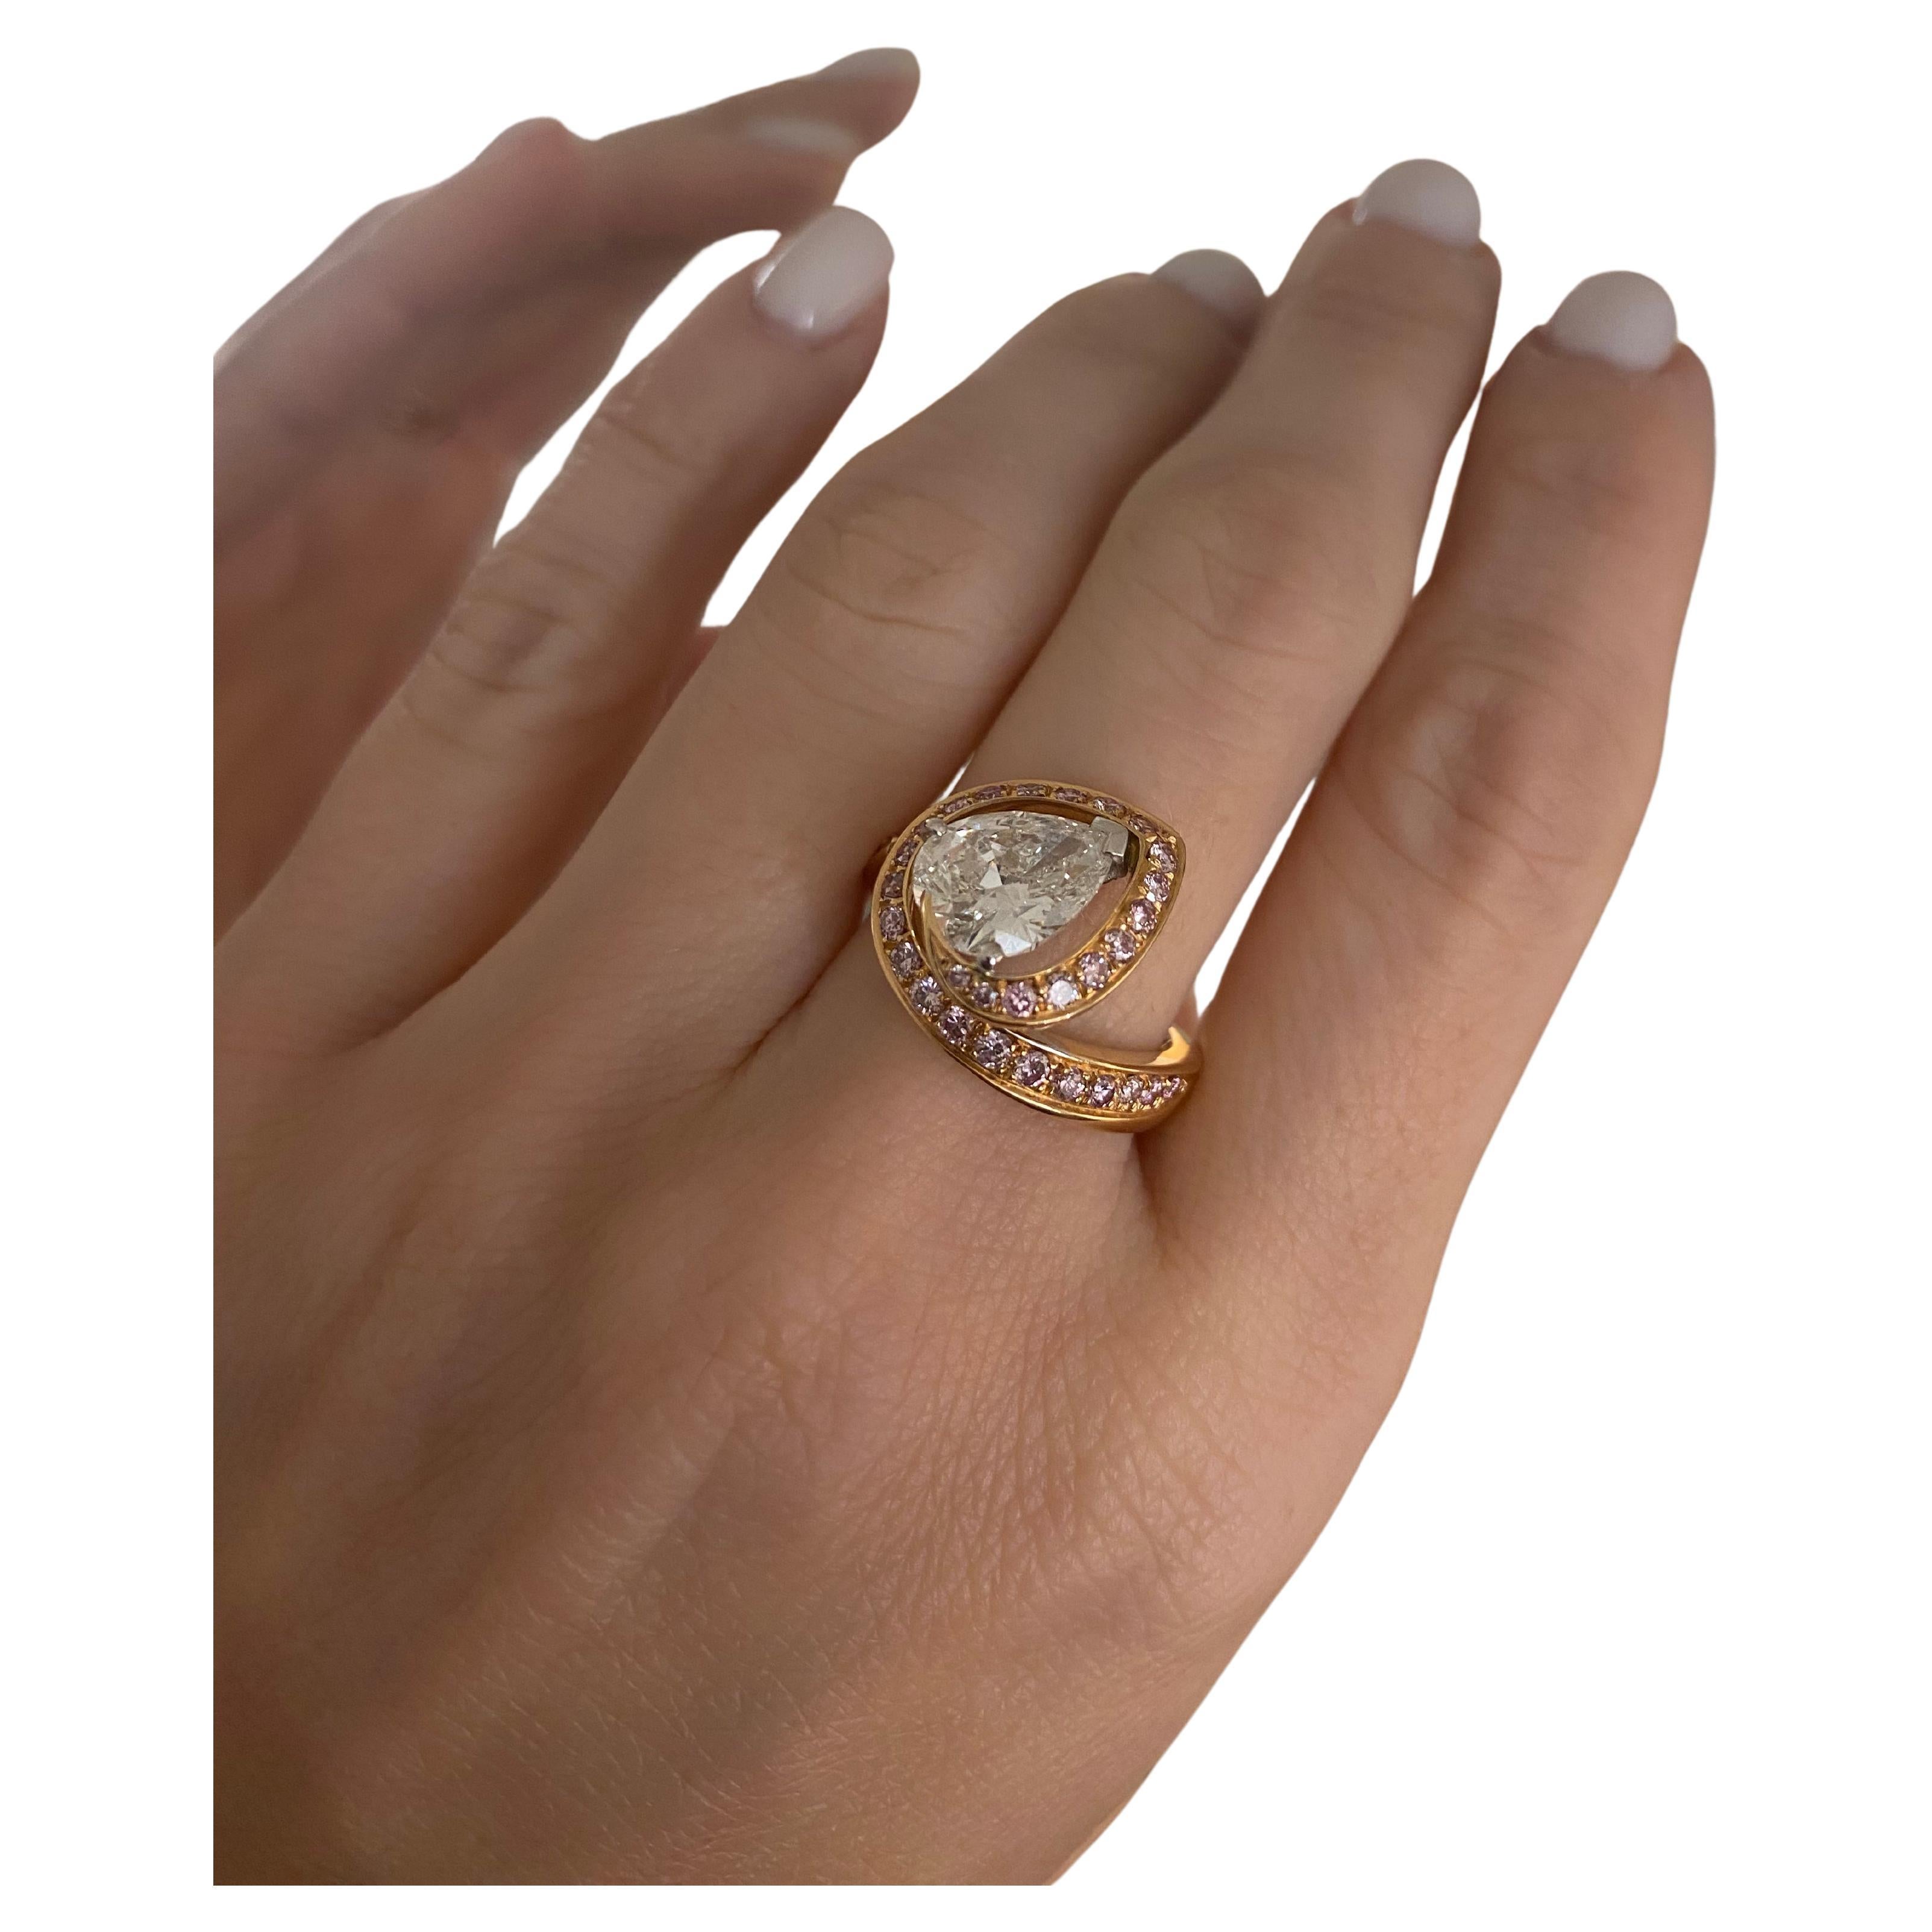 A mesmerizing piece of Italian craftsmanship, this ring, created by the master jeweler SCAVIA, is a testament to the pinnacle of Italian fine jewelry. A ribbon of exquisite pink diamonds gracefully winds its way in a harmonious spiral of rose gold,